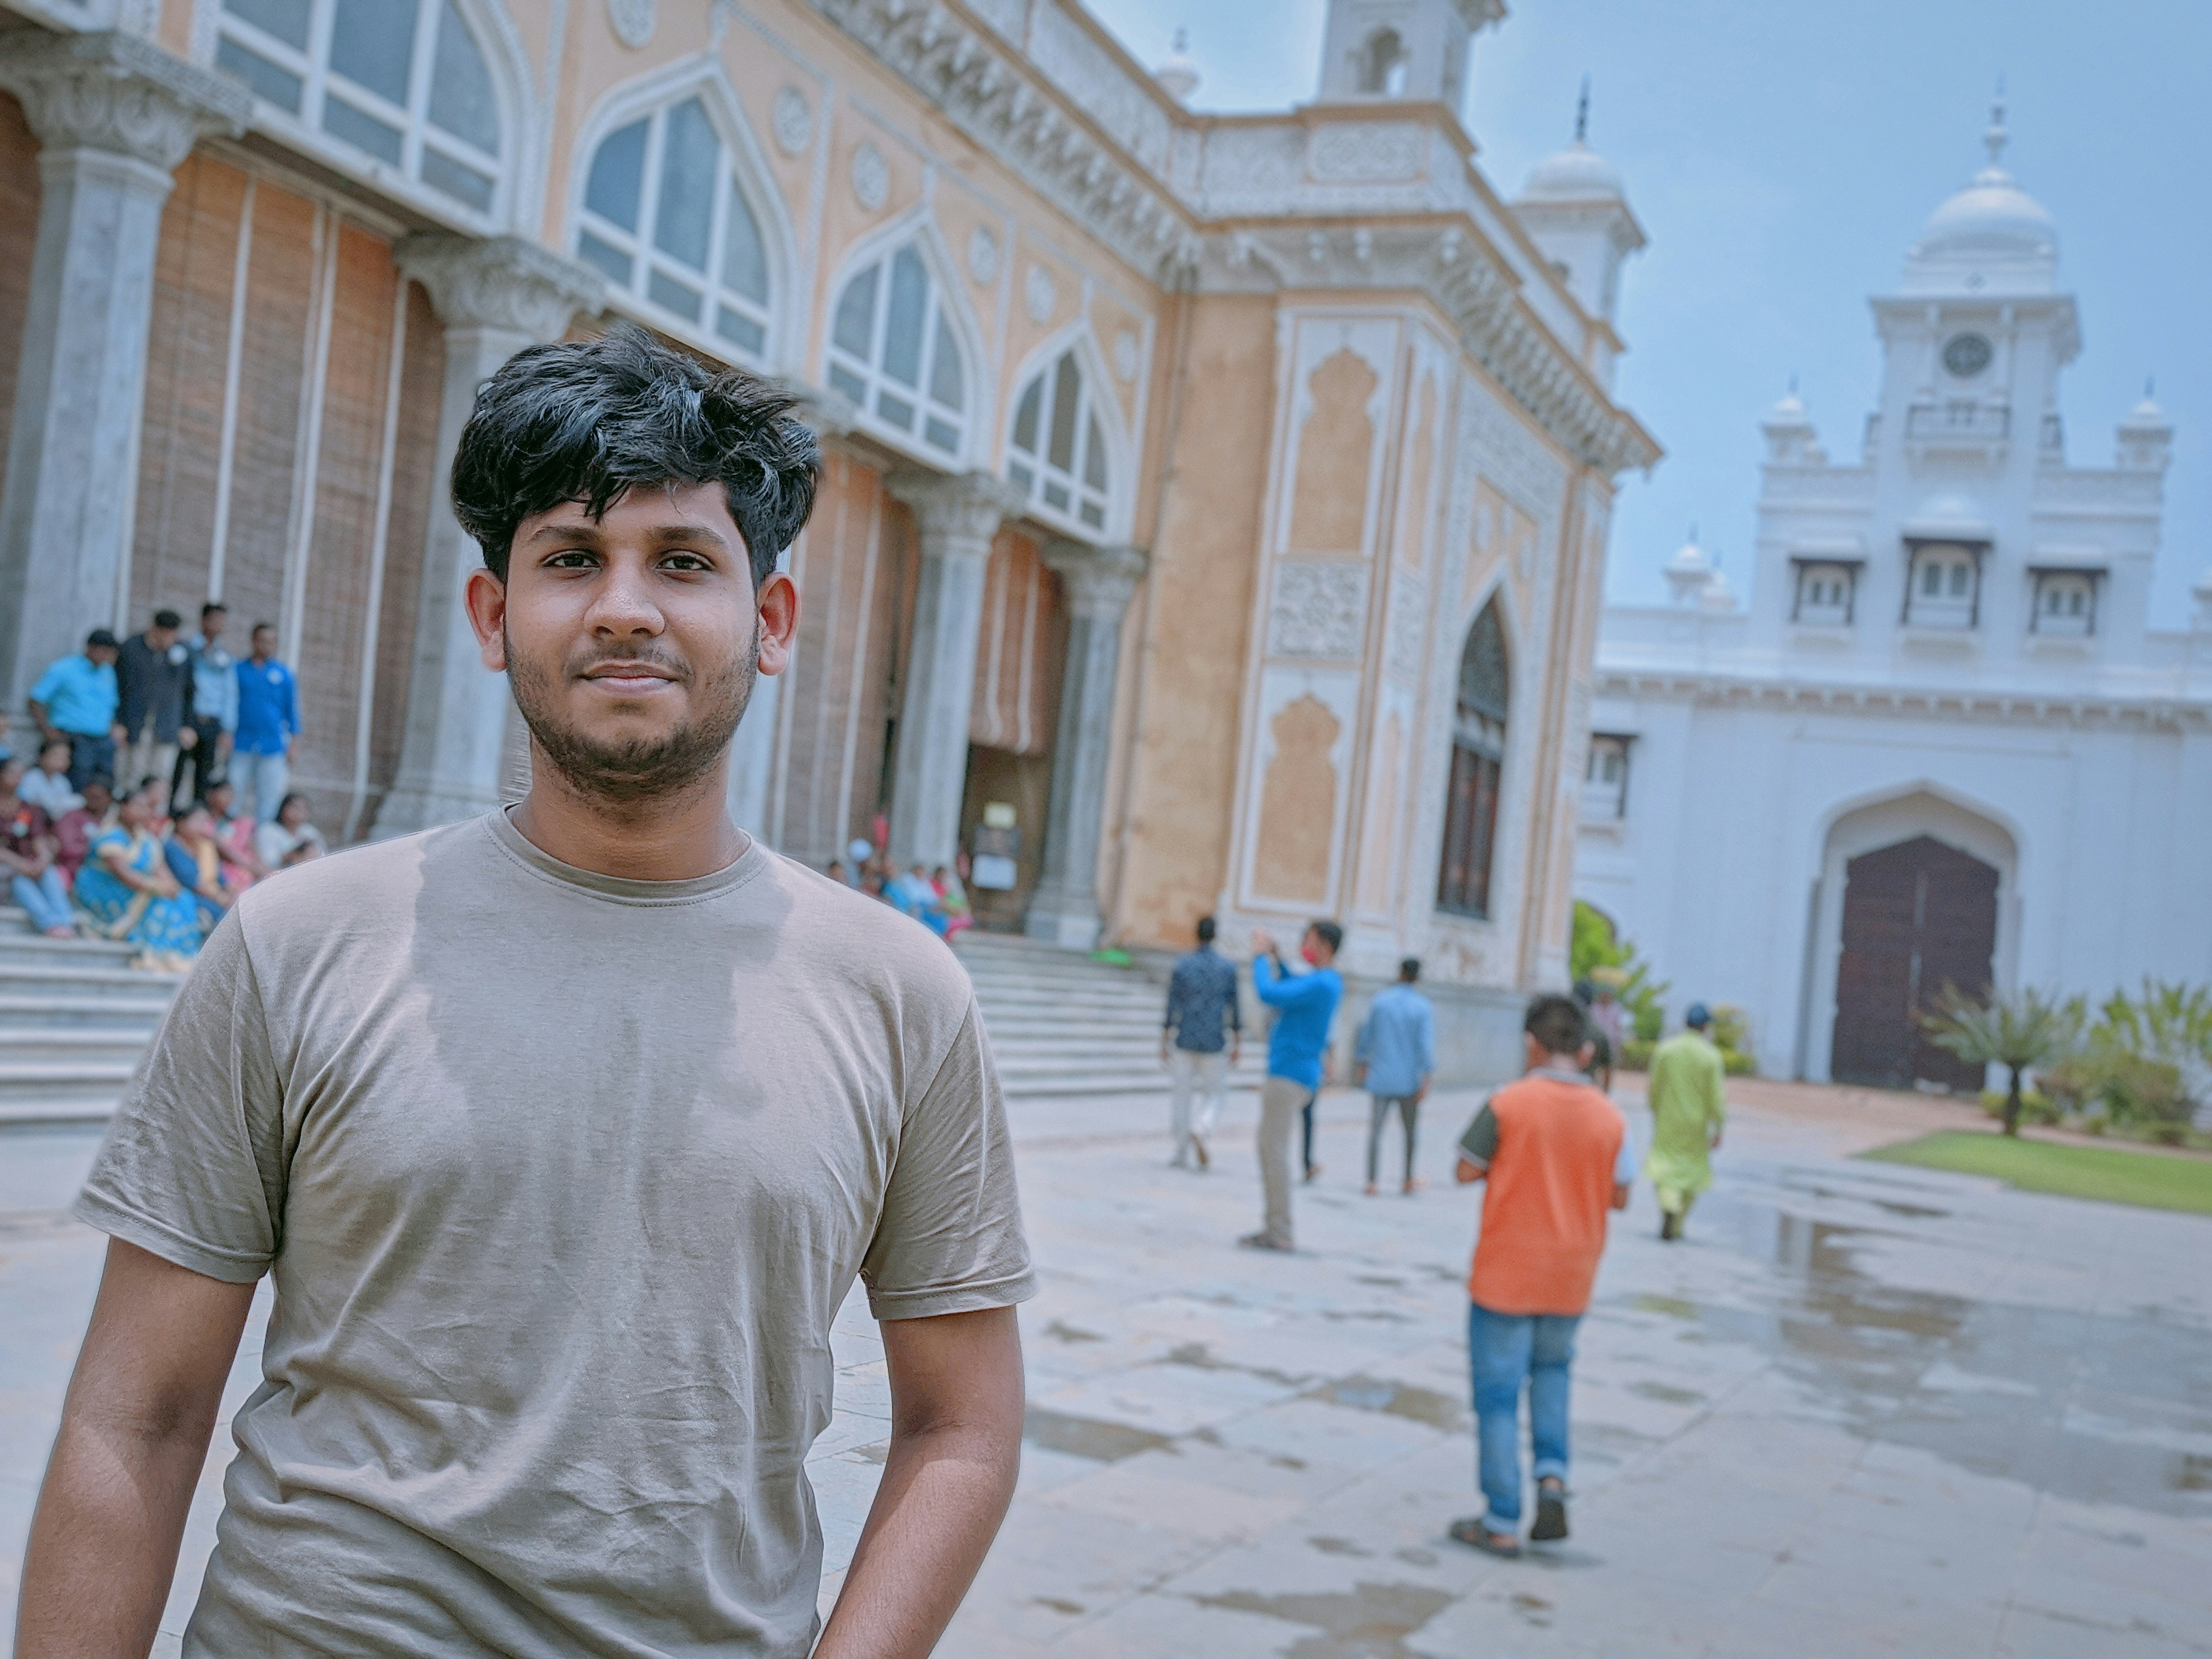 This is Ilias Sami (In Bengali: ইলিয়াস সামি; Birthday: 29th October 2002, in Kushtia Sadar, Bangladesh), a Professional Digital Marketer and SEO Expert from Bangladesh. I am 19 years old in 2022. Studying at Dhaka Polytechnic Institute in CSE.